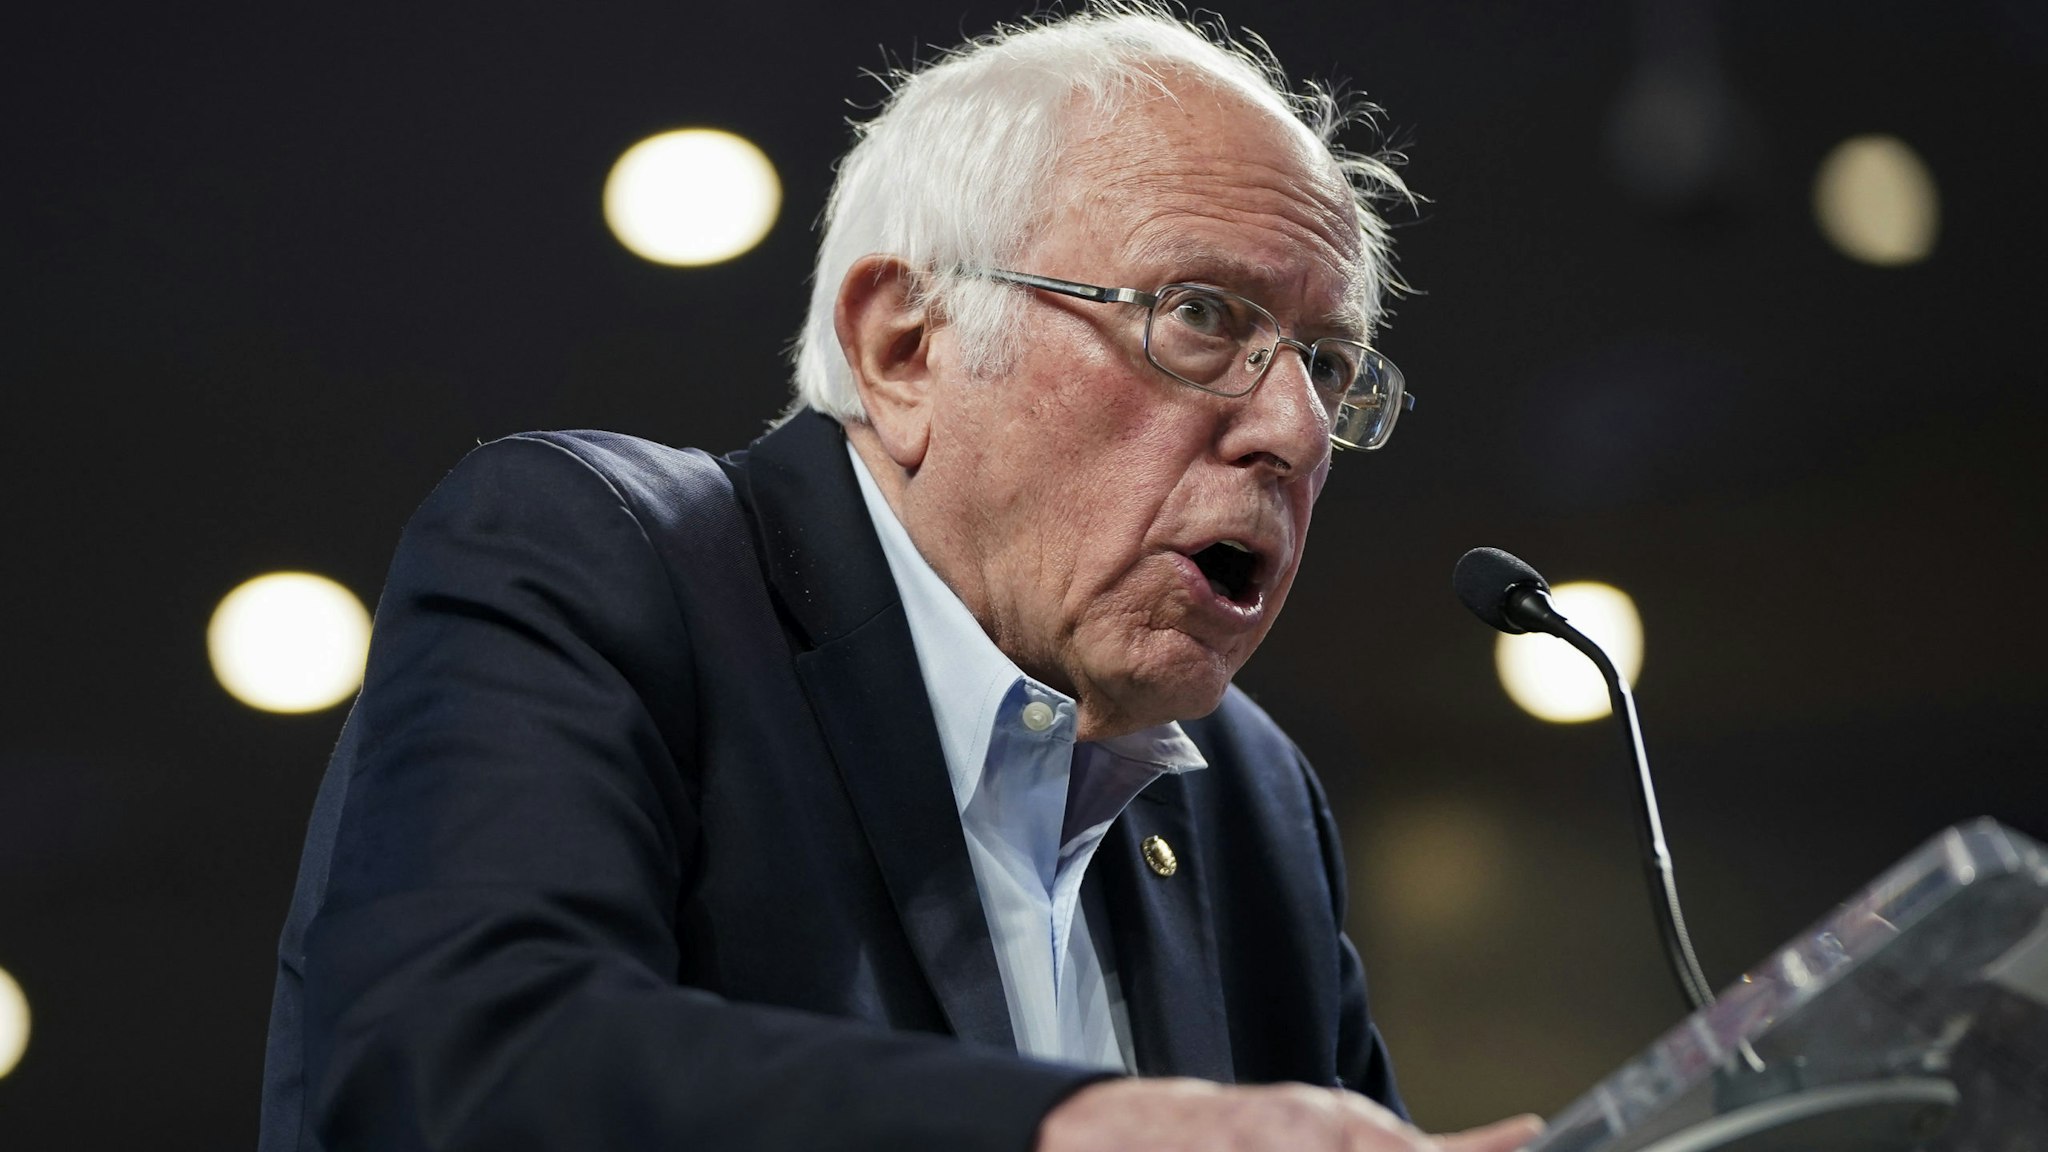 HOUSTON, TX - FEBRUARY 23: Democratic presidential candidate Sen. Bernie Sanders (I-VT) speaks during a campaign rally at the University of Houston on February 23, 2020 in Houston, Texas. With early voting underway in Texas, Sanders is holding four rallies in the delegate-rich state this weekend before traveling on to South Carolina. Texas holds their primary on Super Tuesday March 3rd, along with over a dozen other states.